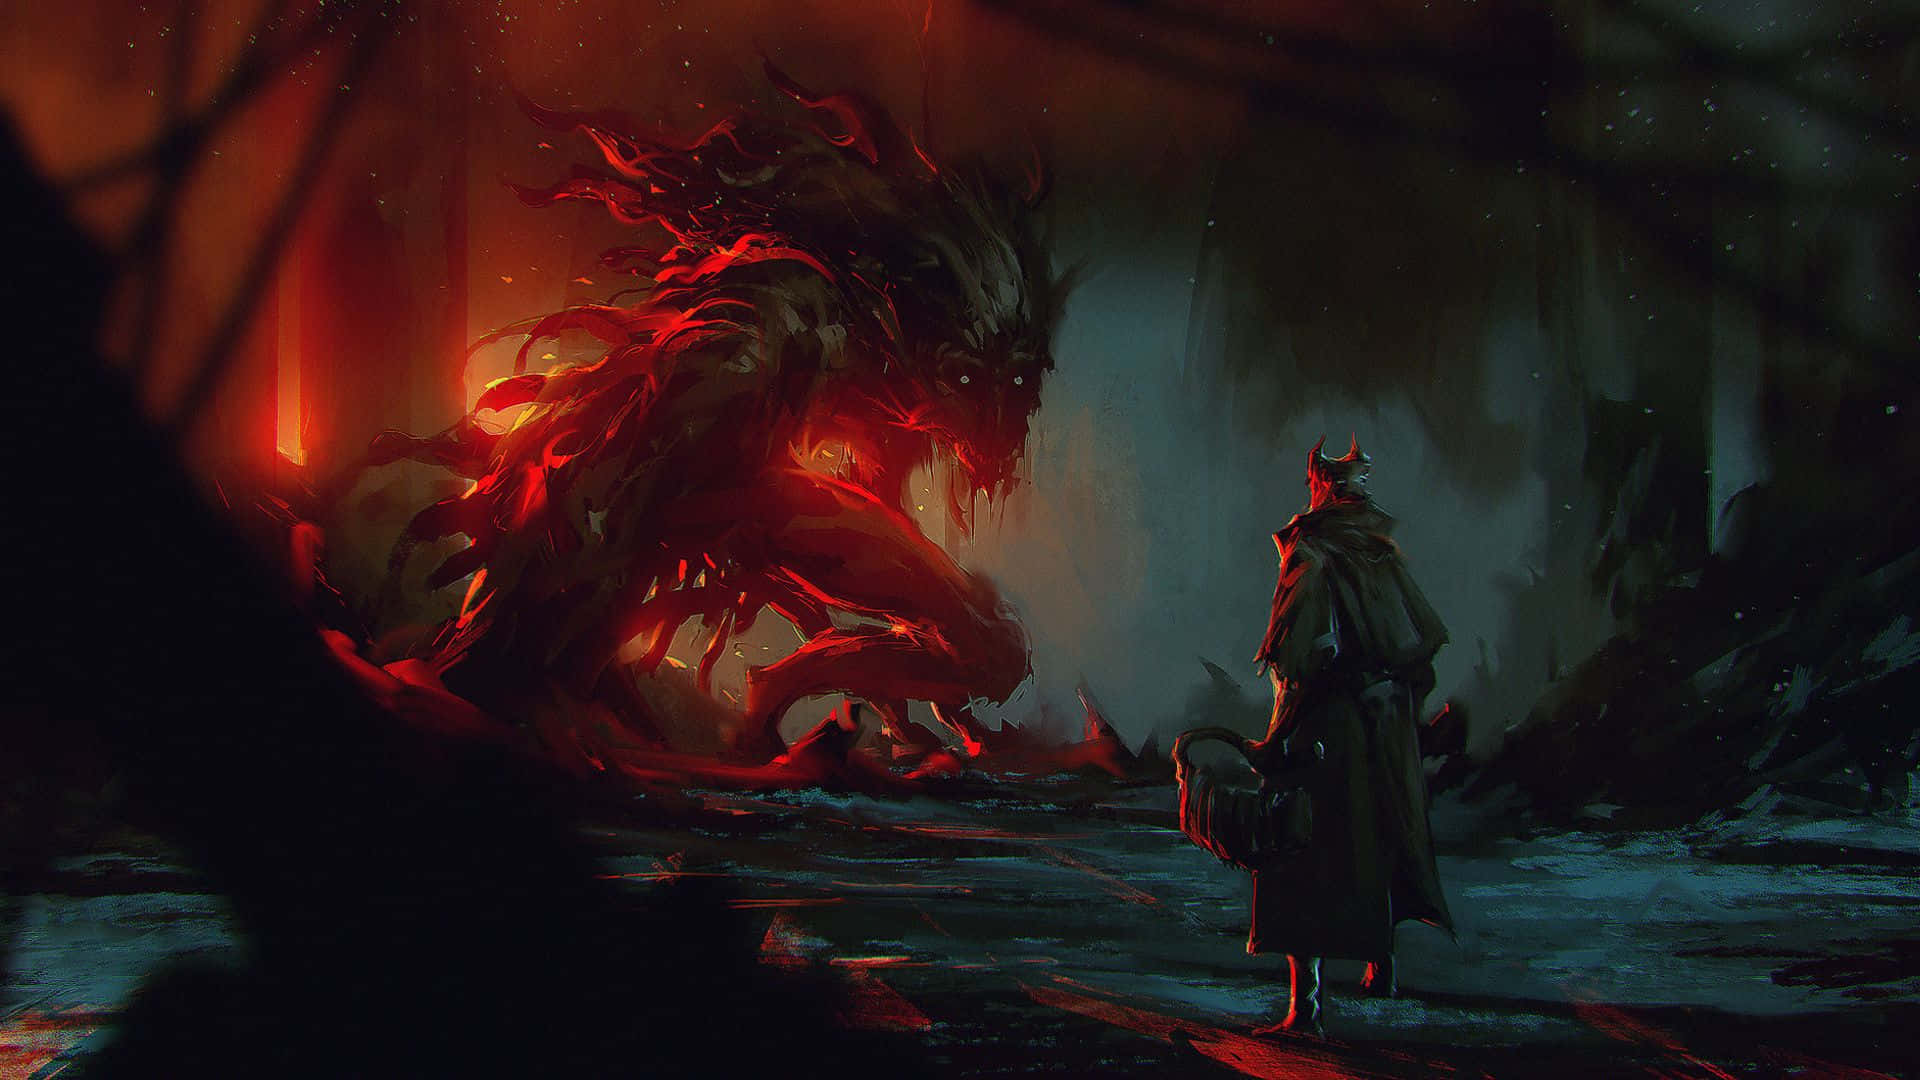 A fierce hunter exploring the Gothic city of Yharnam in Bloodborne